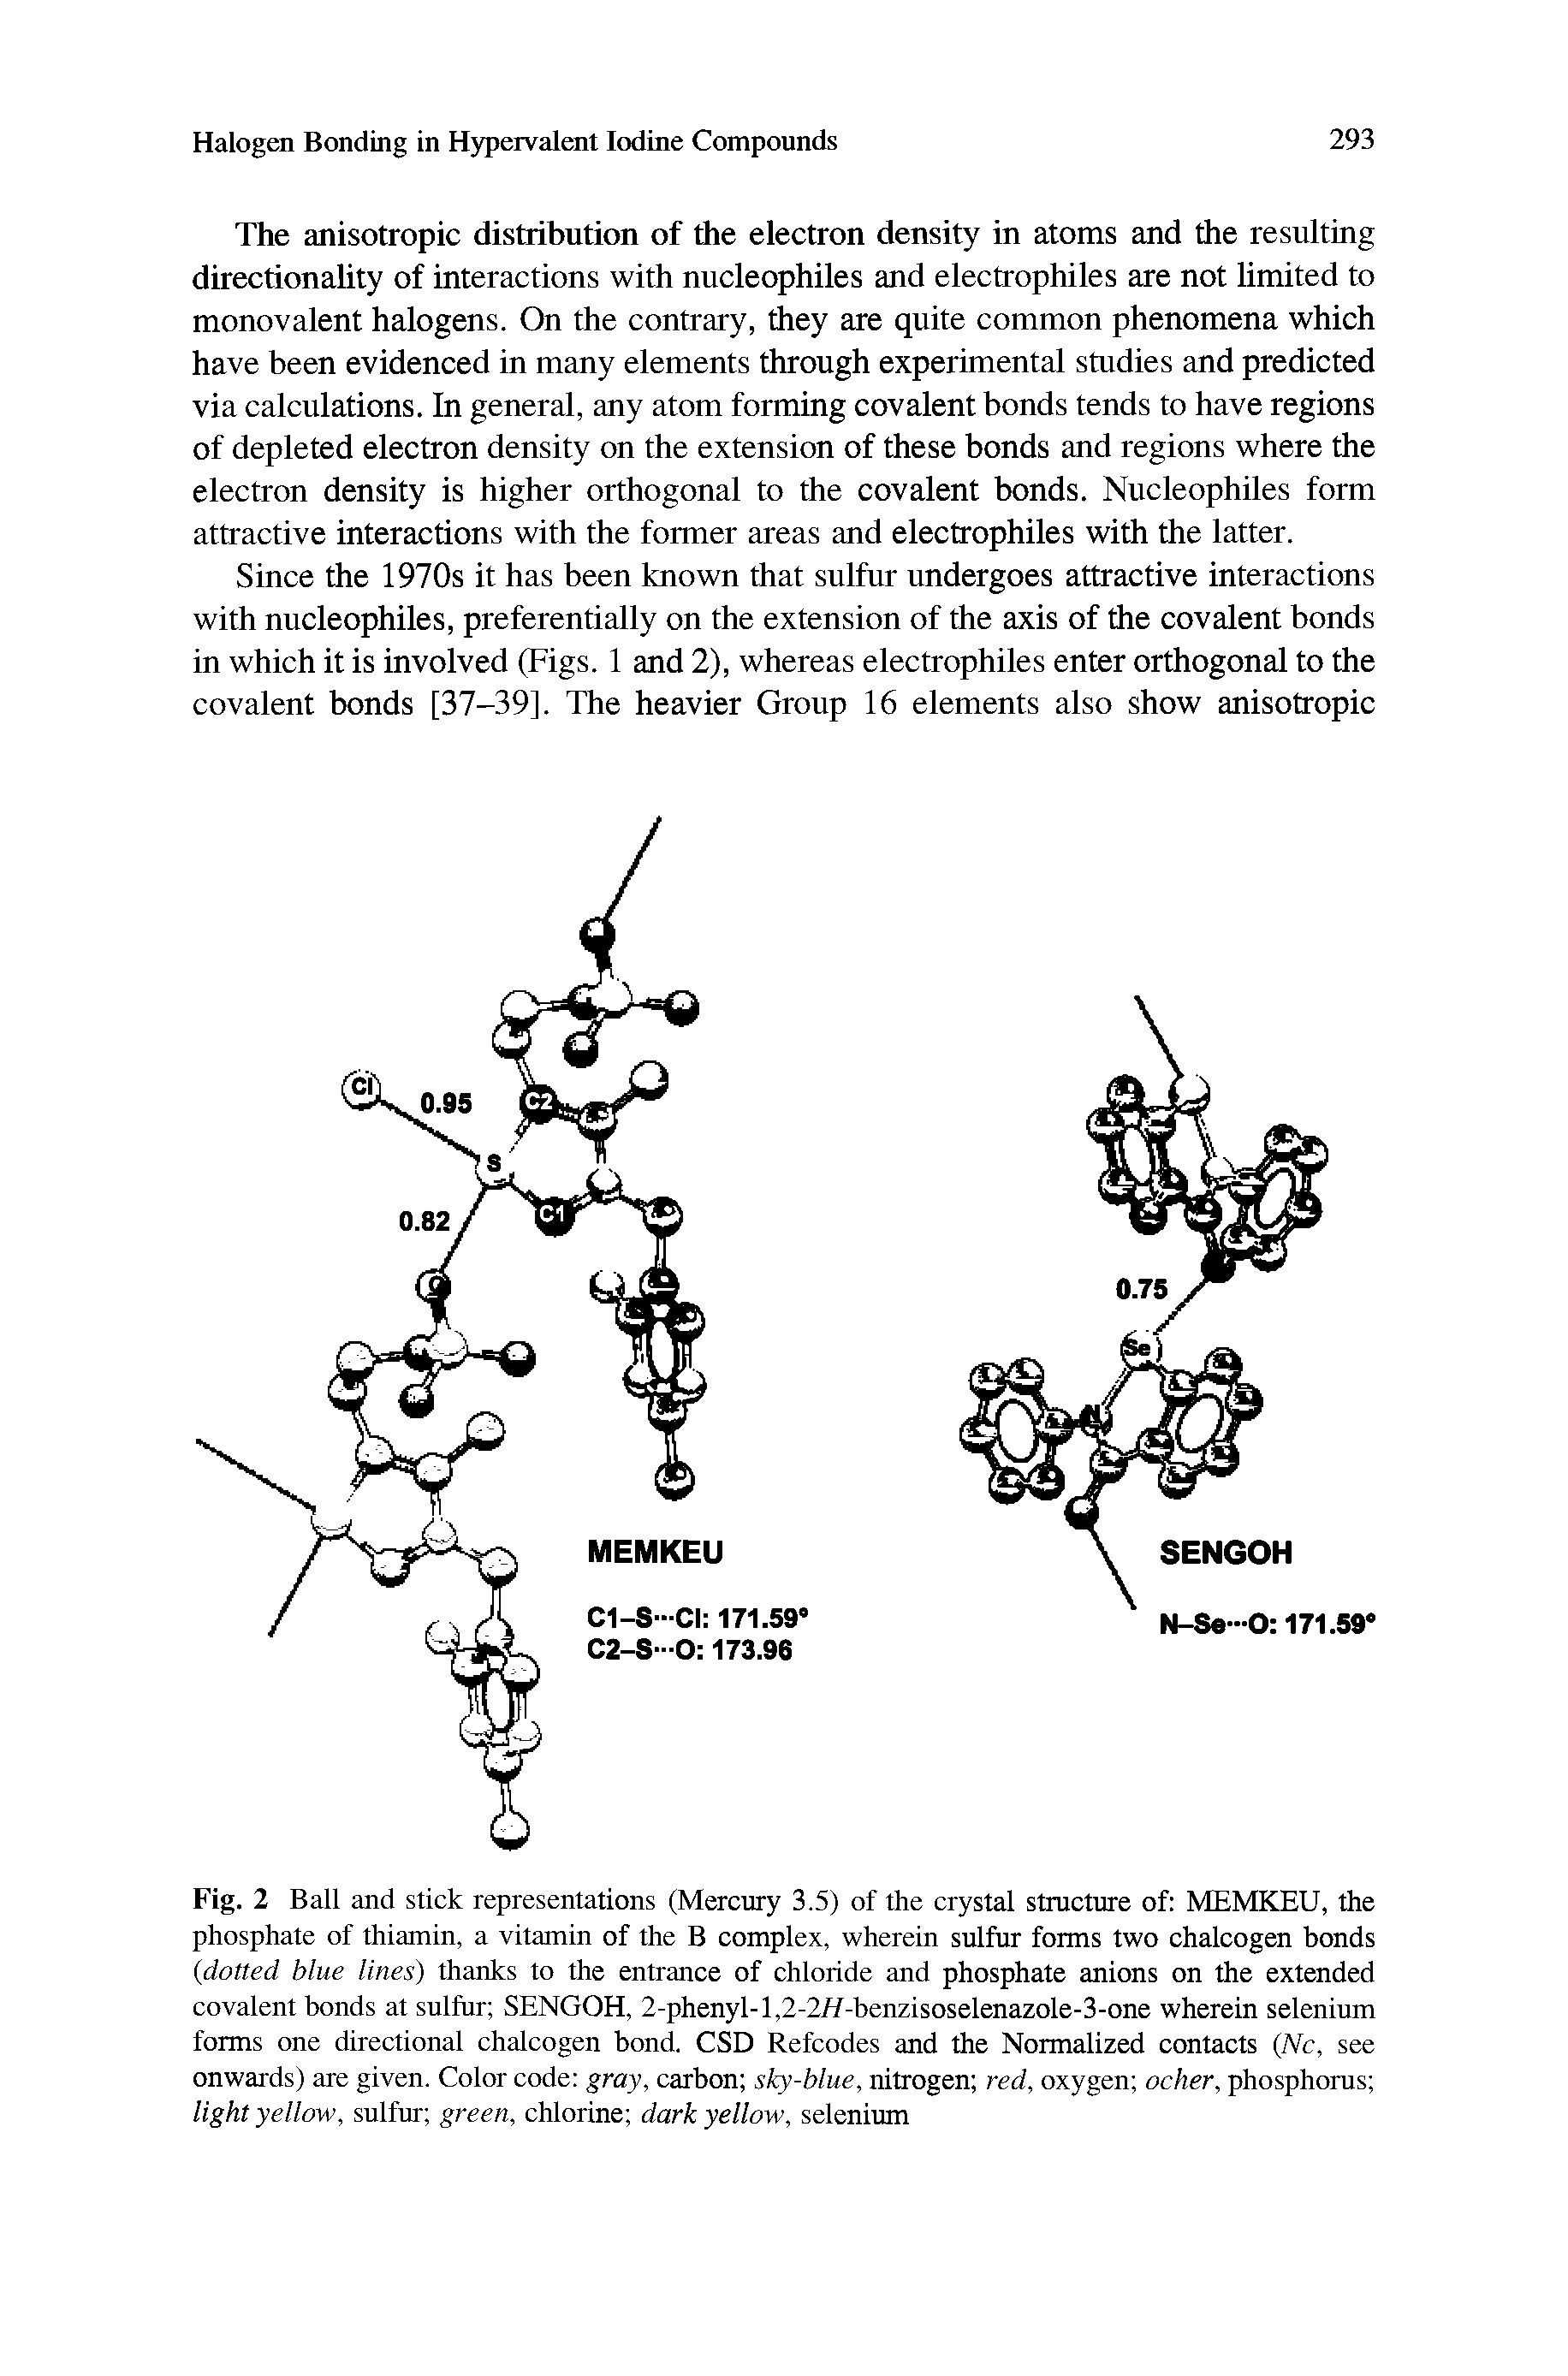 Fig. 2 Ball and stick representations (Mercury 3.5) of the crystal structure of MEMKEU, the phosphate of thiamin, a vitamin of the B complex, wherein sulfur forms two chalcogen bonds dotted blue lines) thanks to the entrance of chloride and phosphate anions on the extended covalent bonds at sulfur SENGOH, 2-phenyl-l,2-2//-benzisoselenazole-3-one wherein selenium forms one directional chalcogen bond. CSD Refcodes and the Normalized contacts Nc, see onwards) are given. Color code gray, carbon sky-blue, nitrogen red, oxygen ocher, phosphorus light yellow, sulfur green, chlorine dark yellow, selenium...